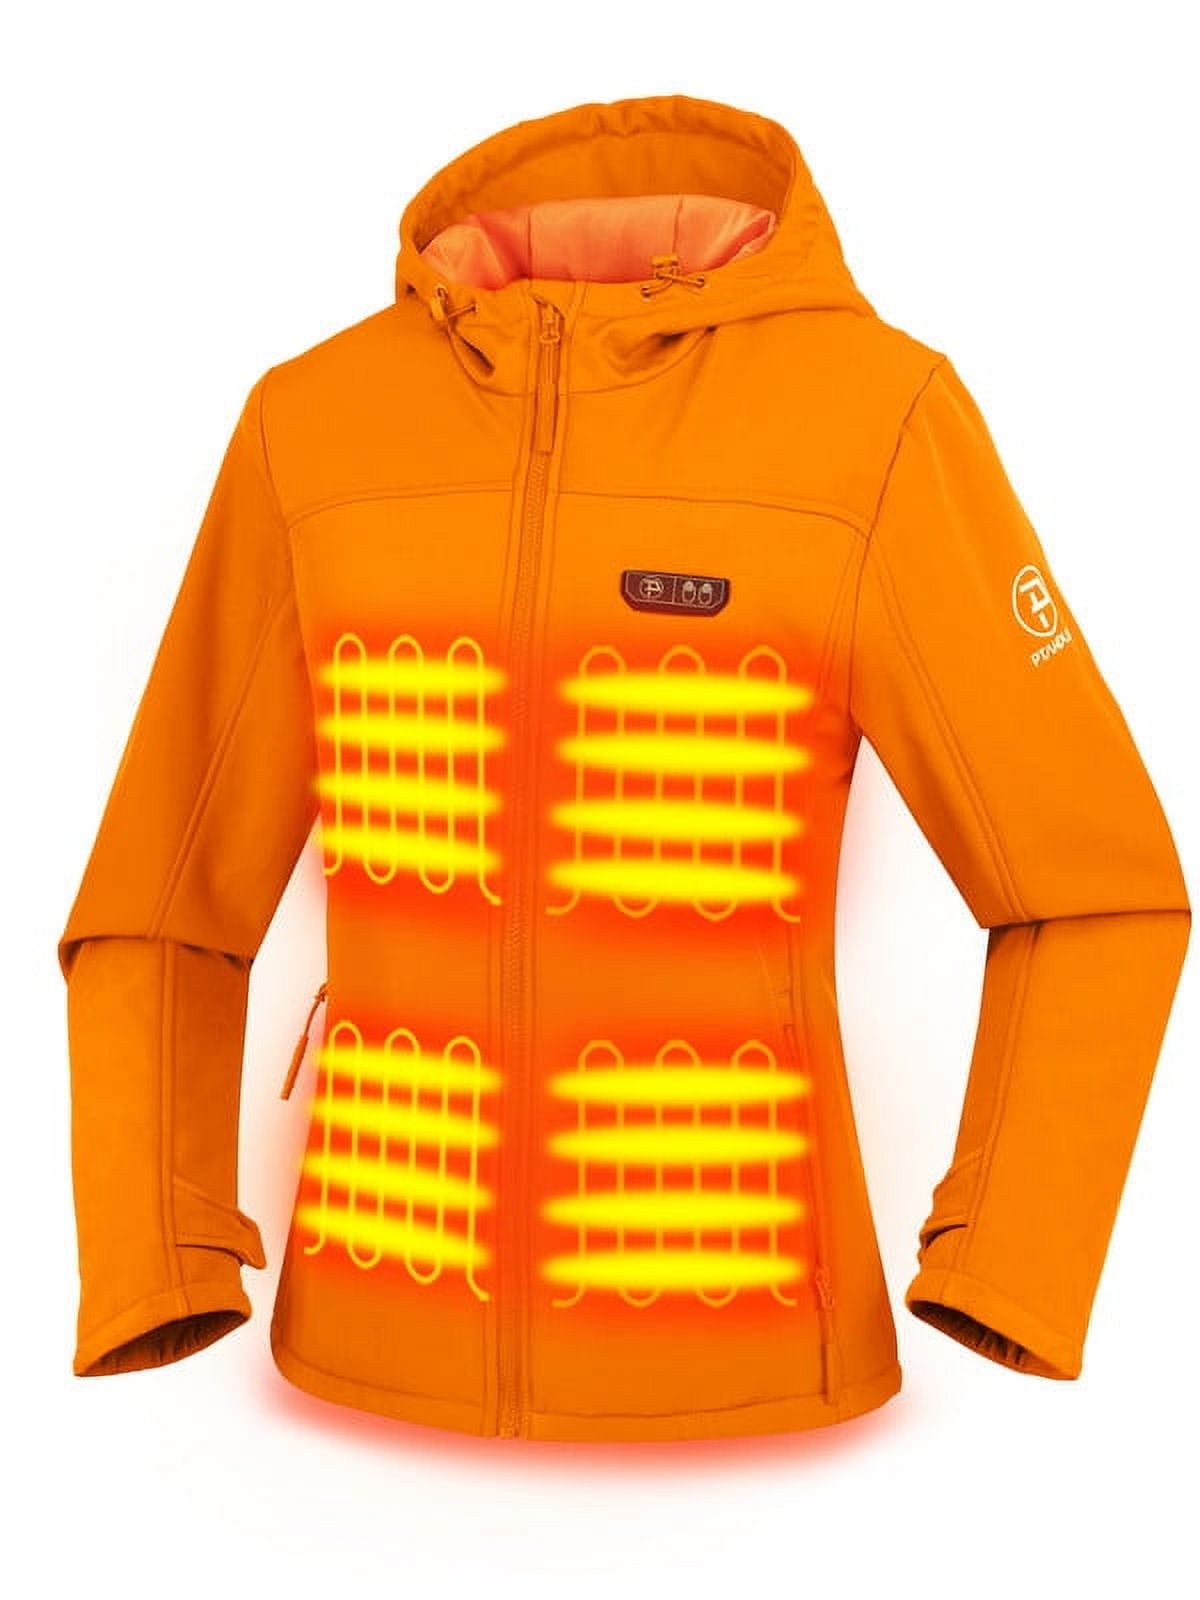 Heated Gilet For Women and Ladies, stay stylish with 8 hours warmth